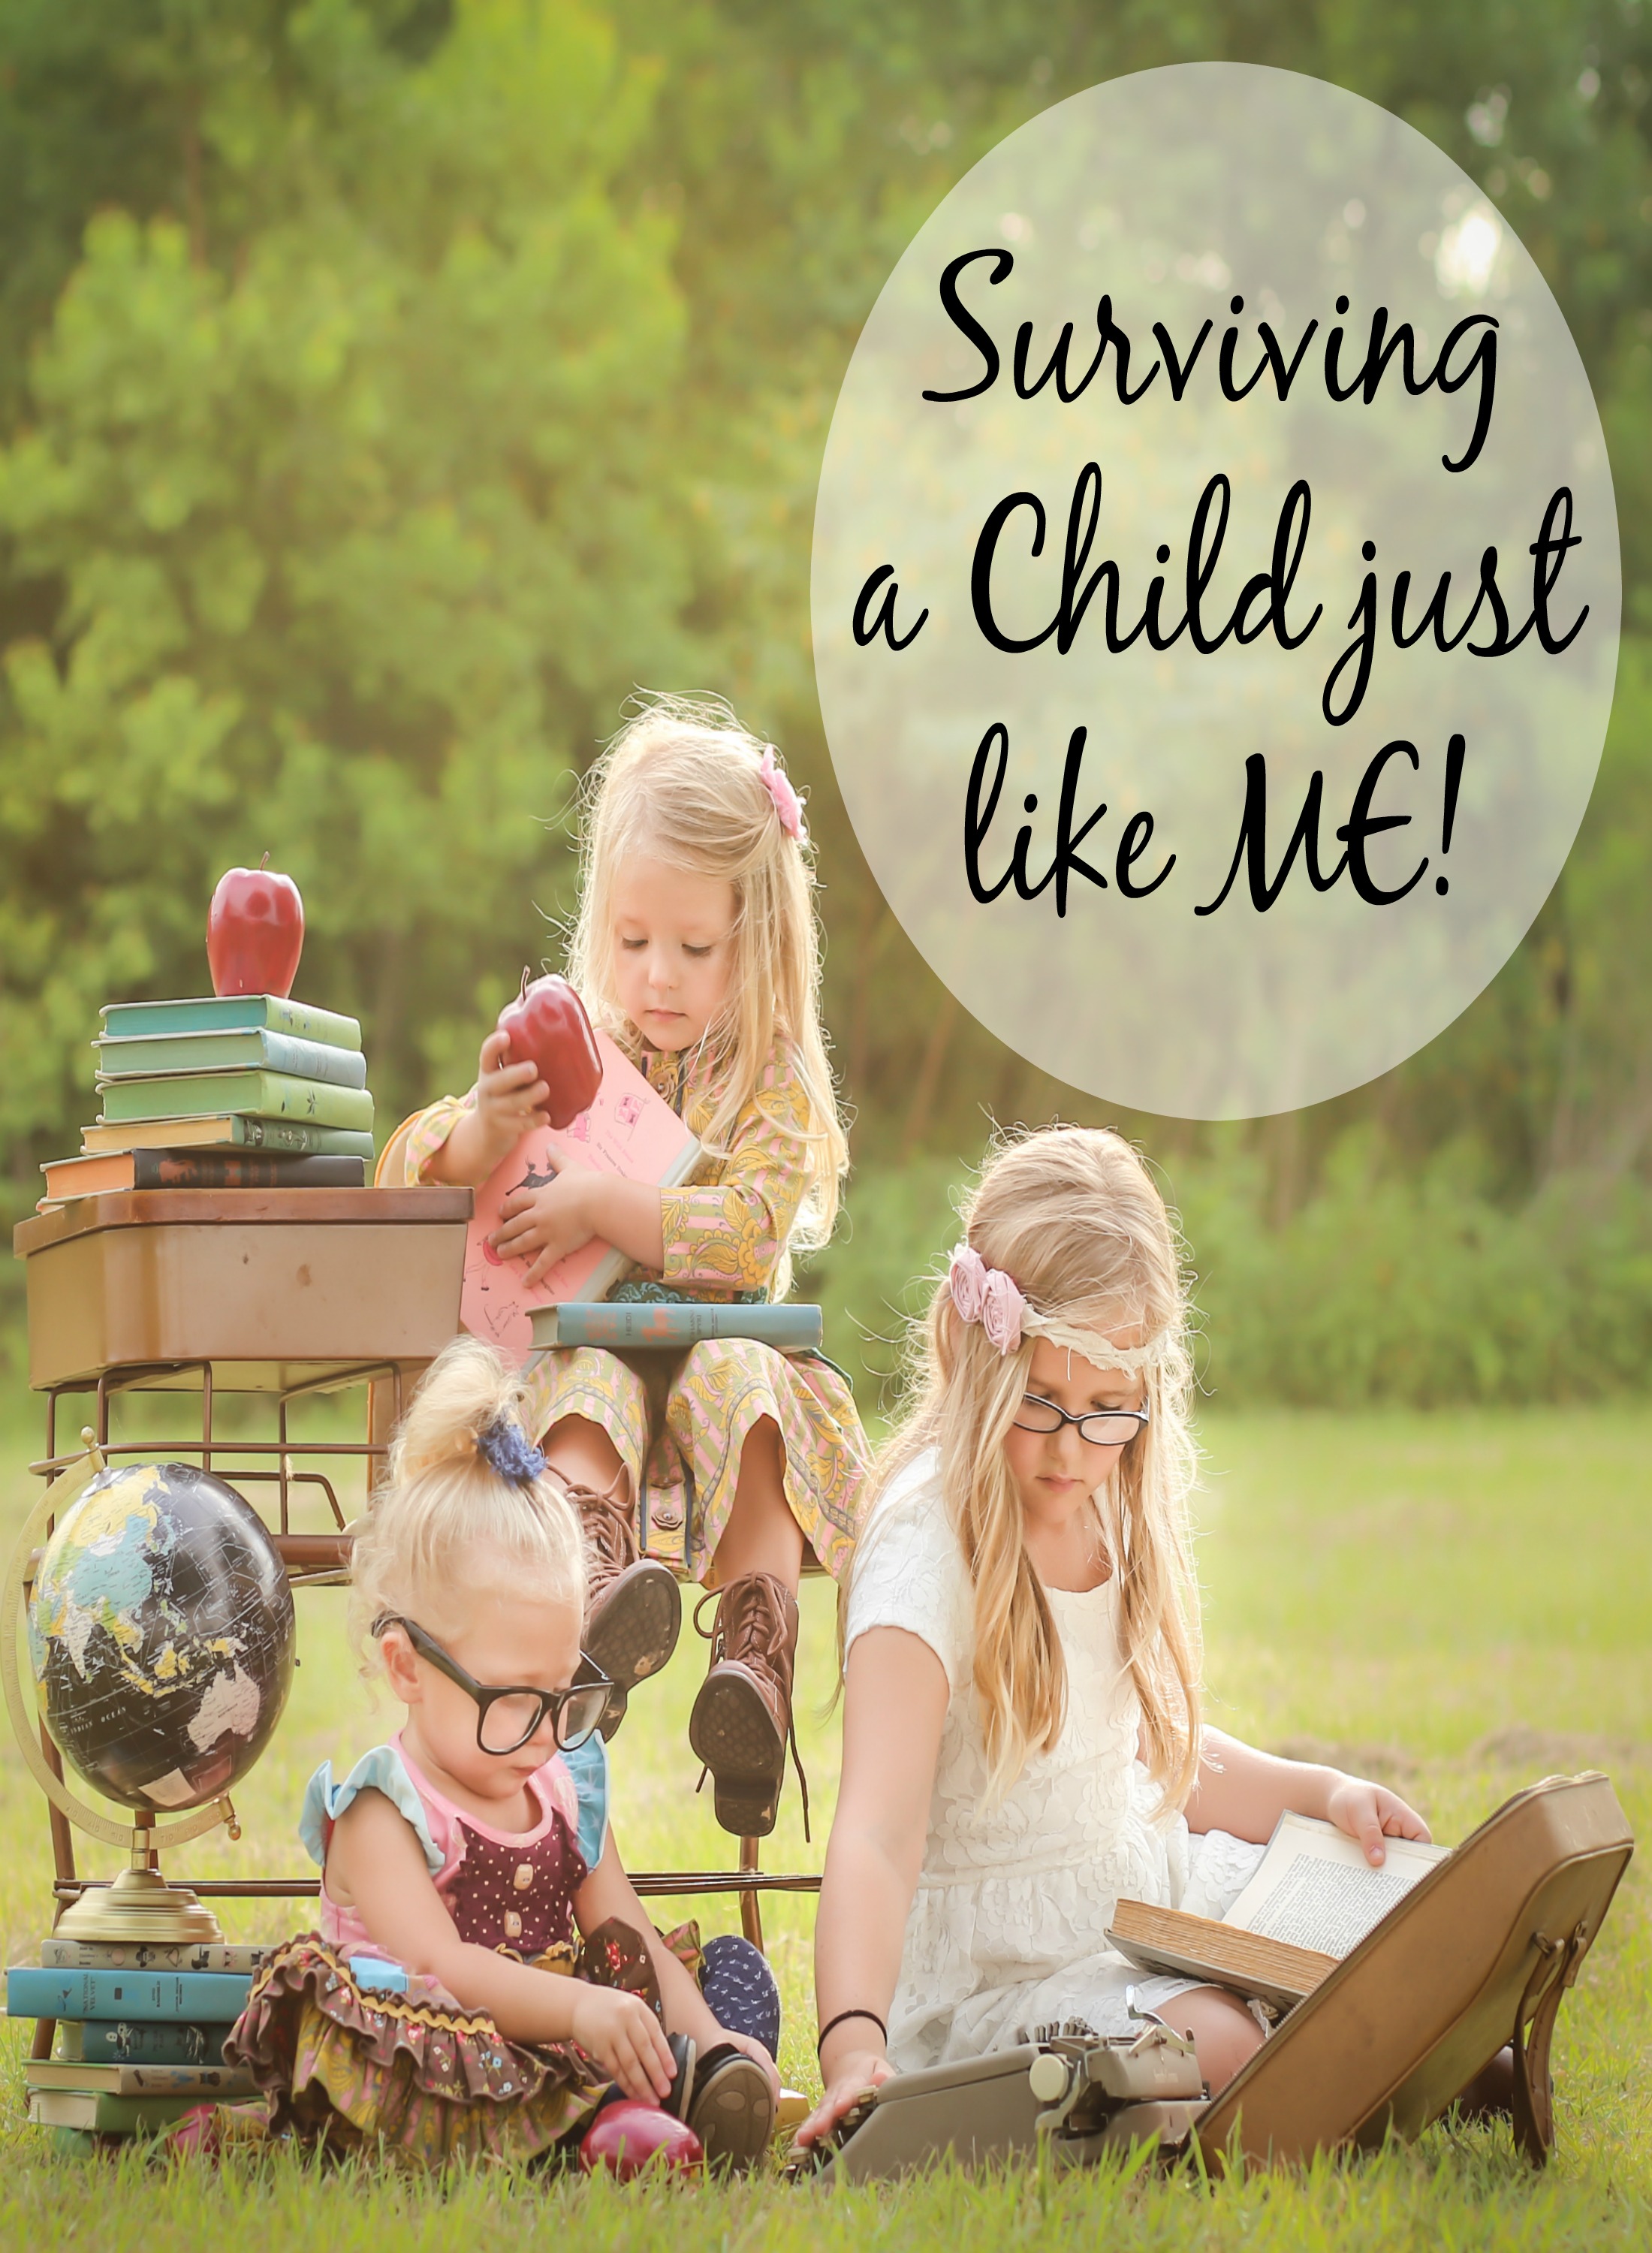 Surviving a Child just Like Me